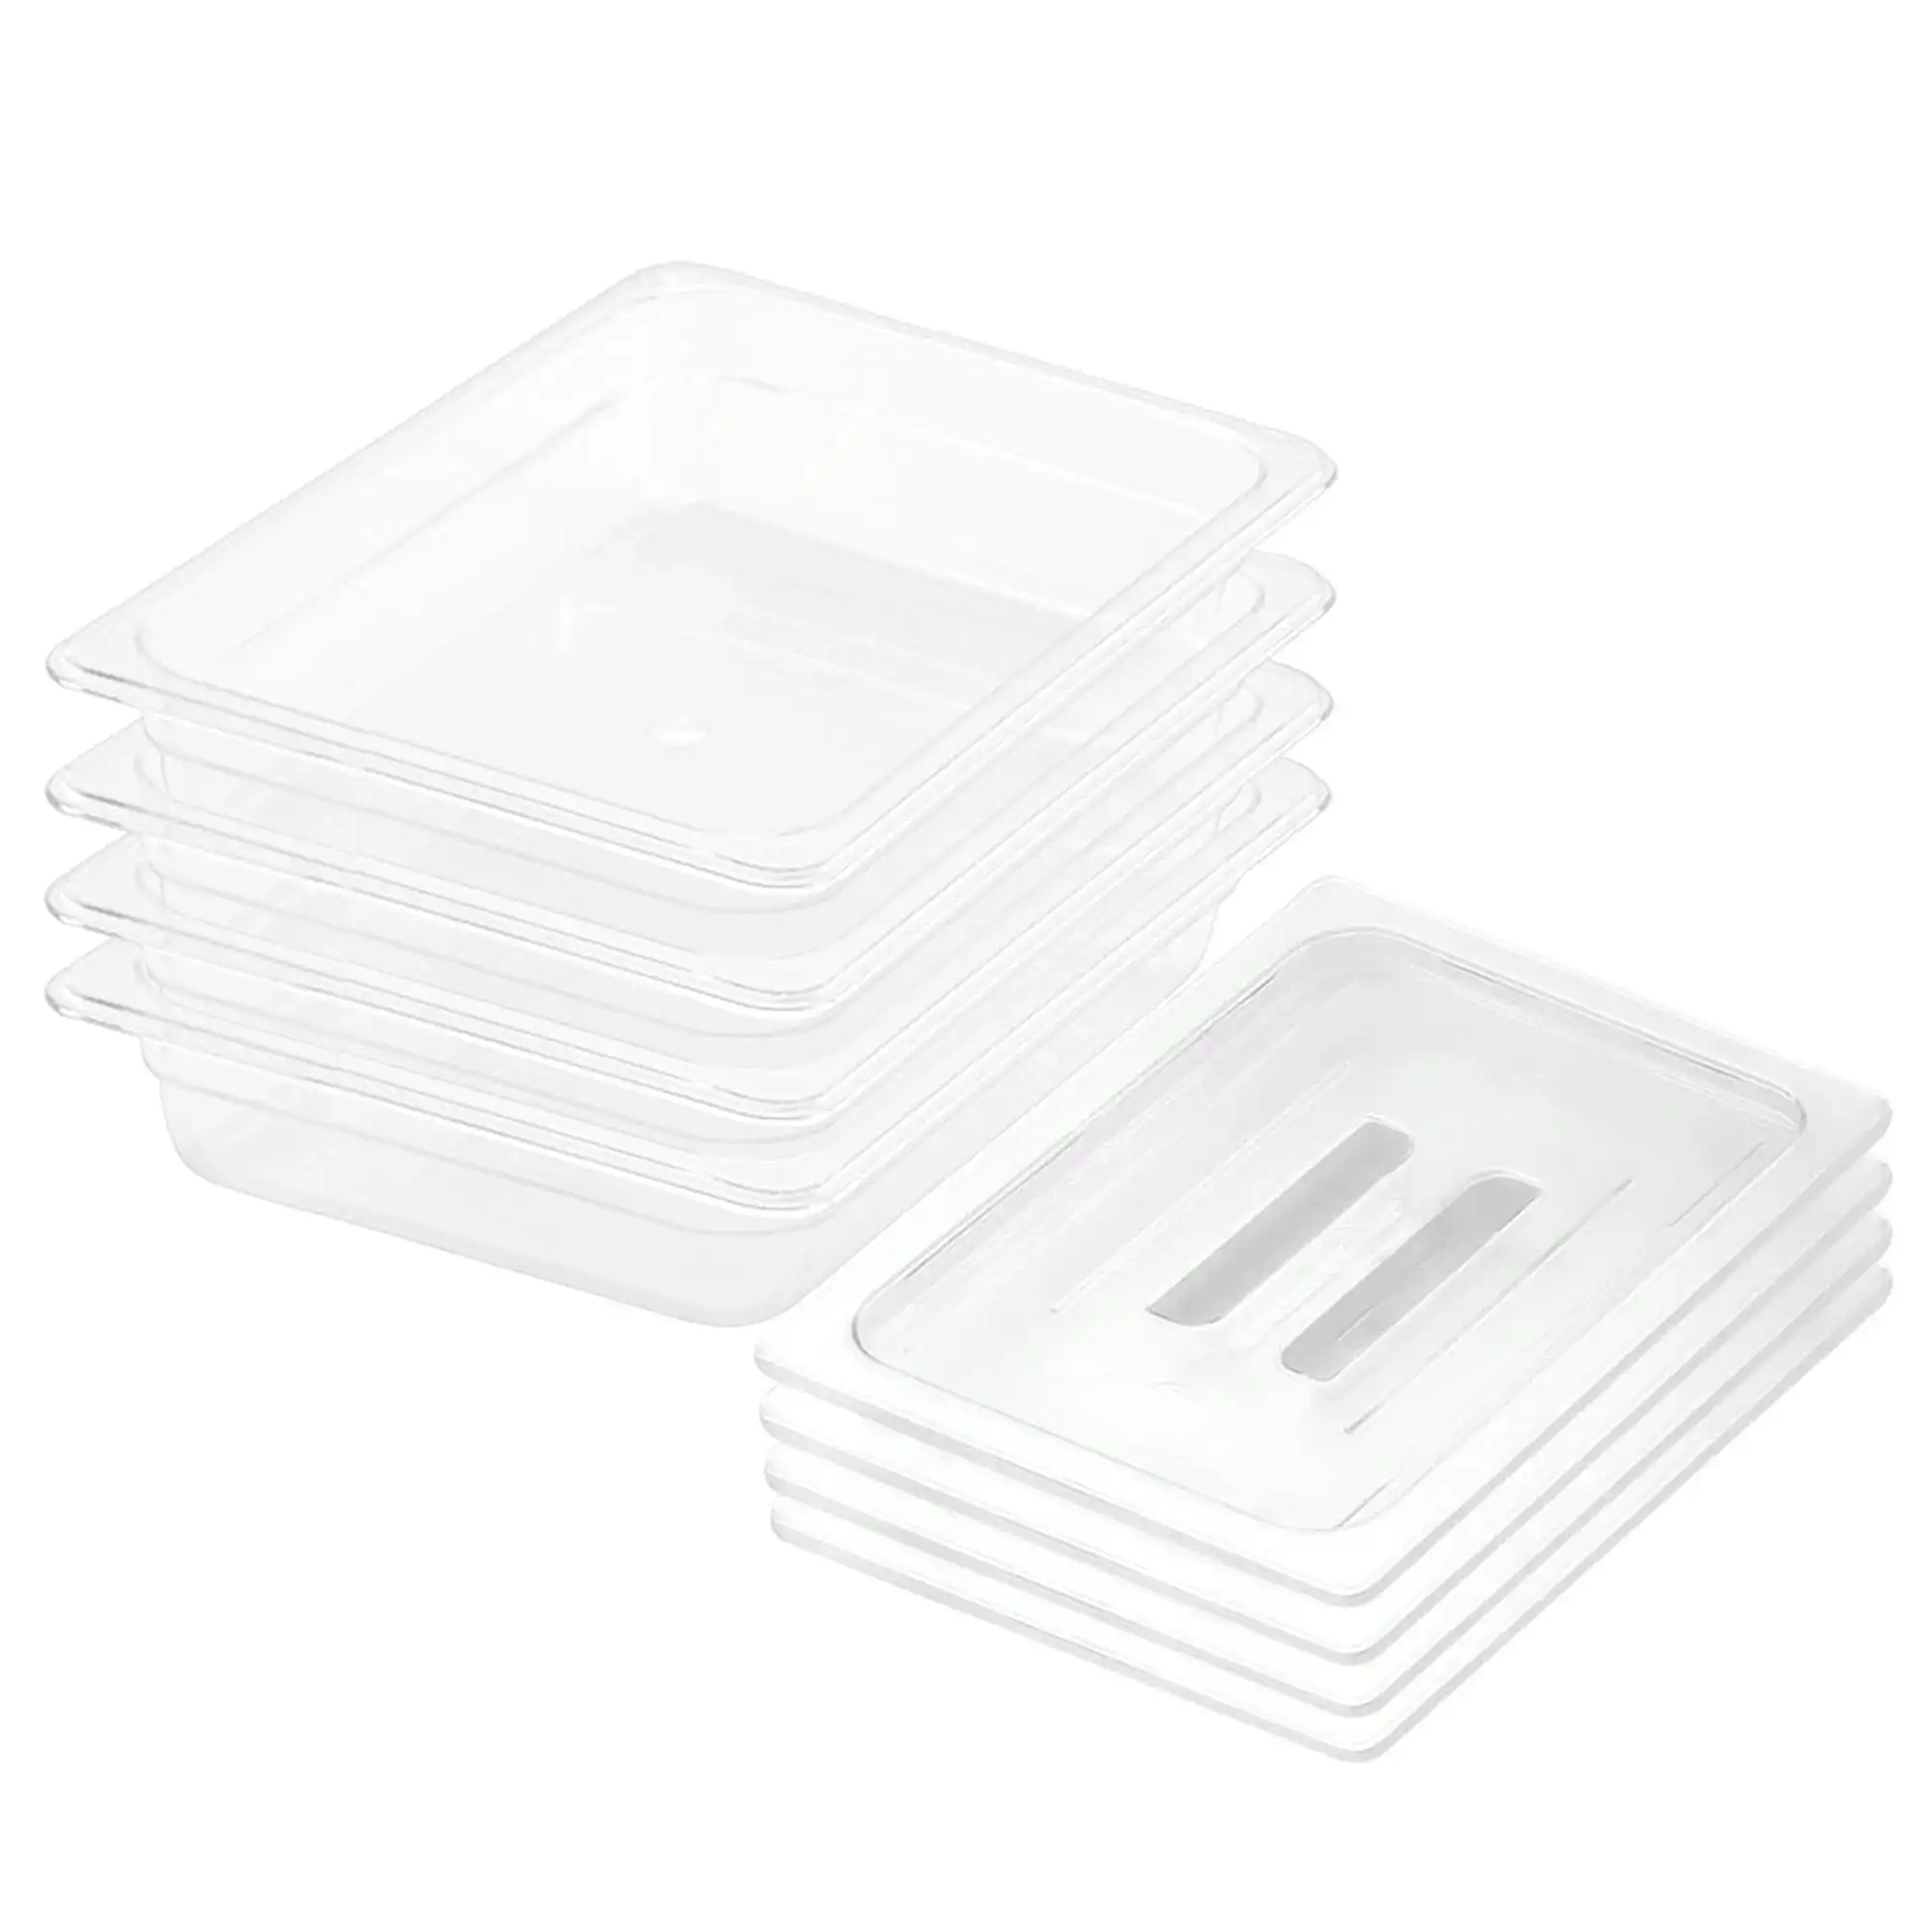 Soga 65mm Clear Gastronorm GN Pan 1/2 Food Tray Storage Bundle of 4 with Lid